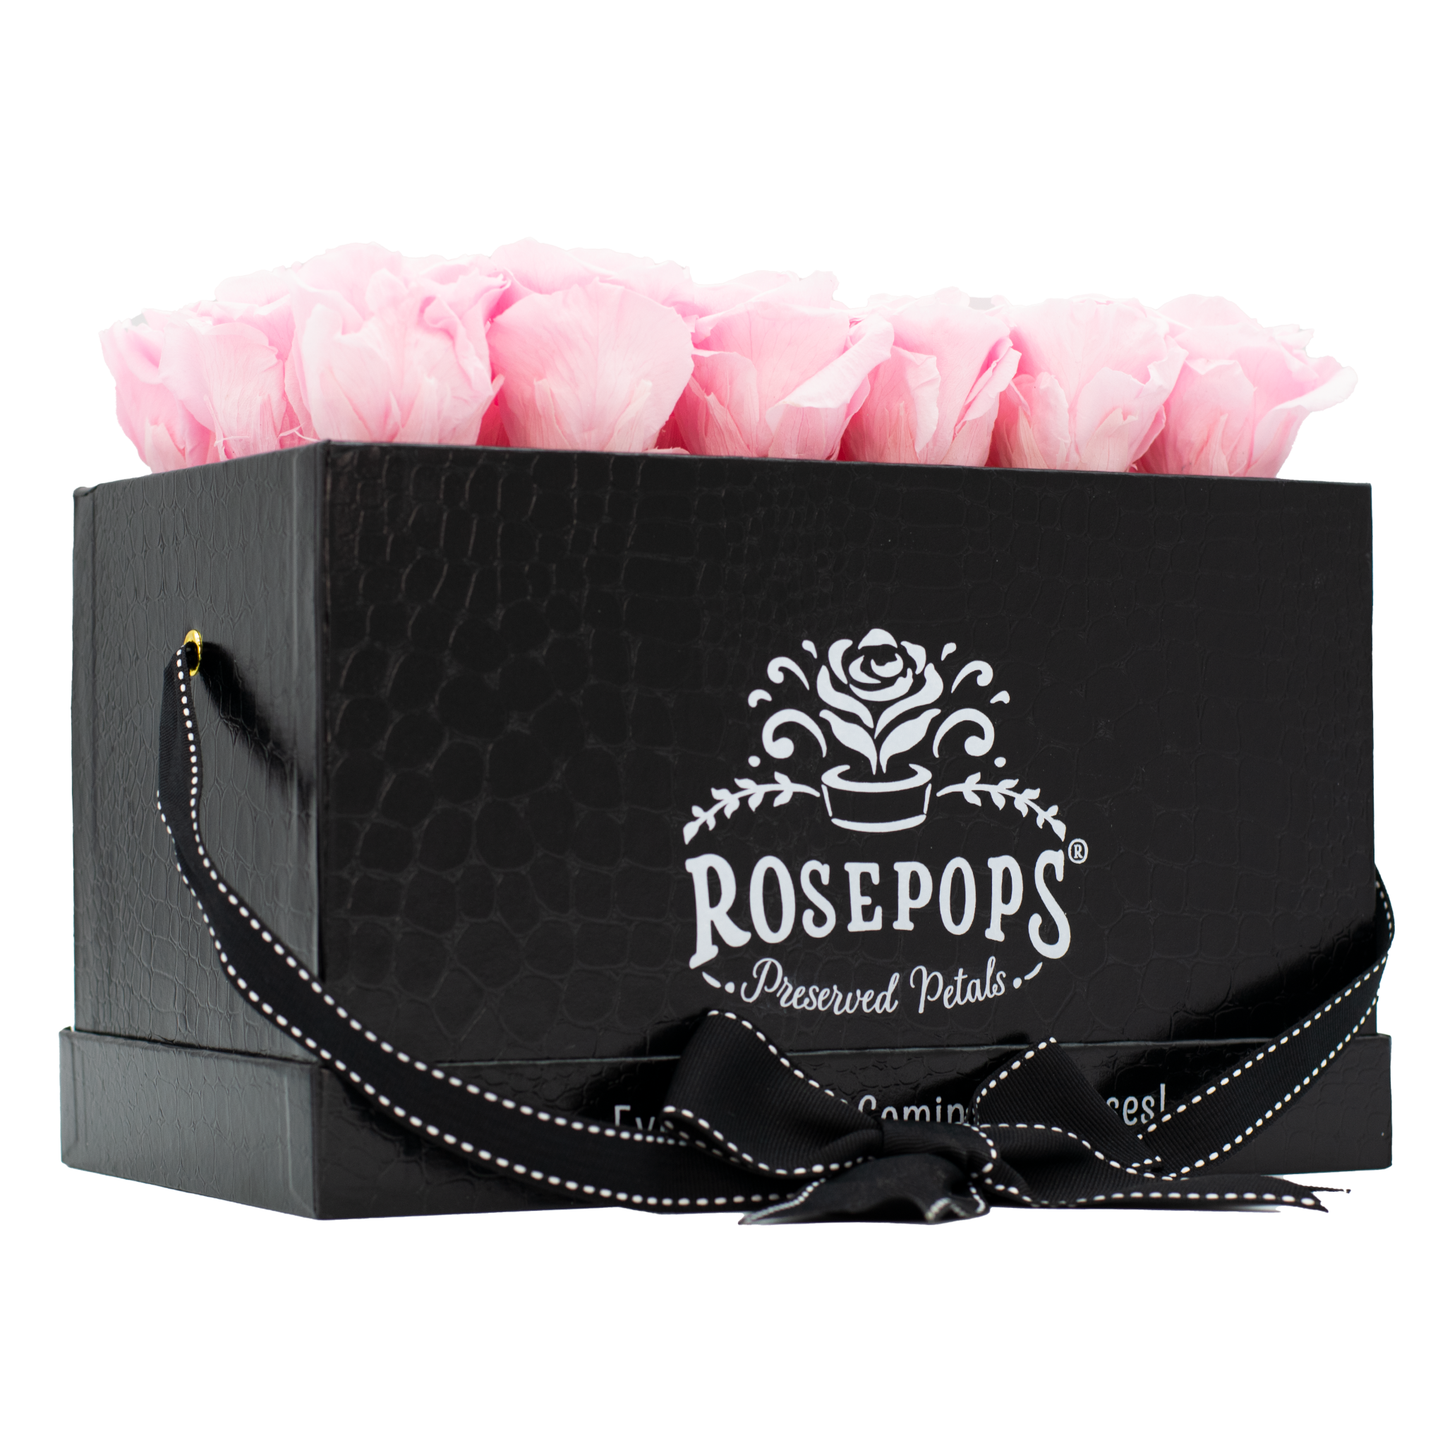 The Black Monogrammed Pop of the Line - Cotton Candy Roses